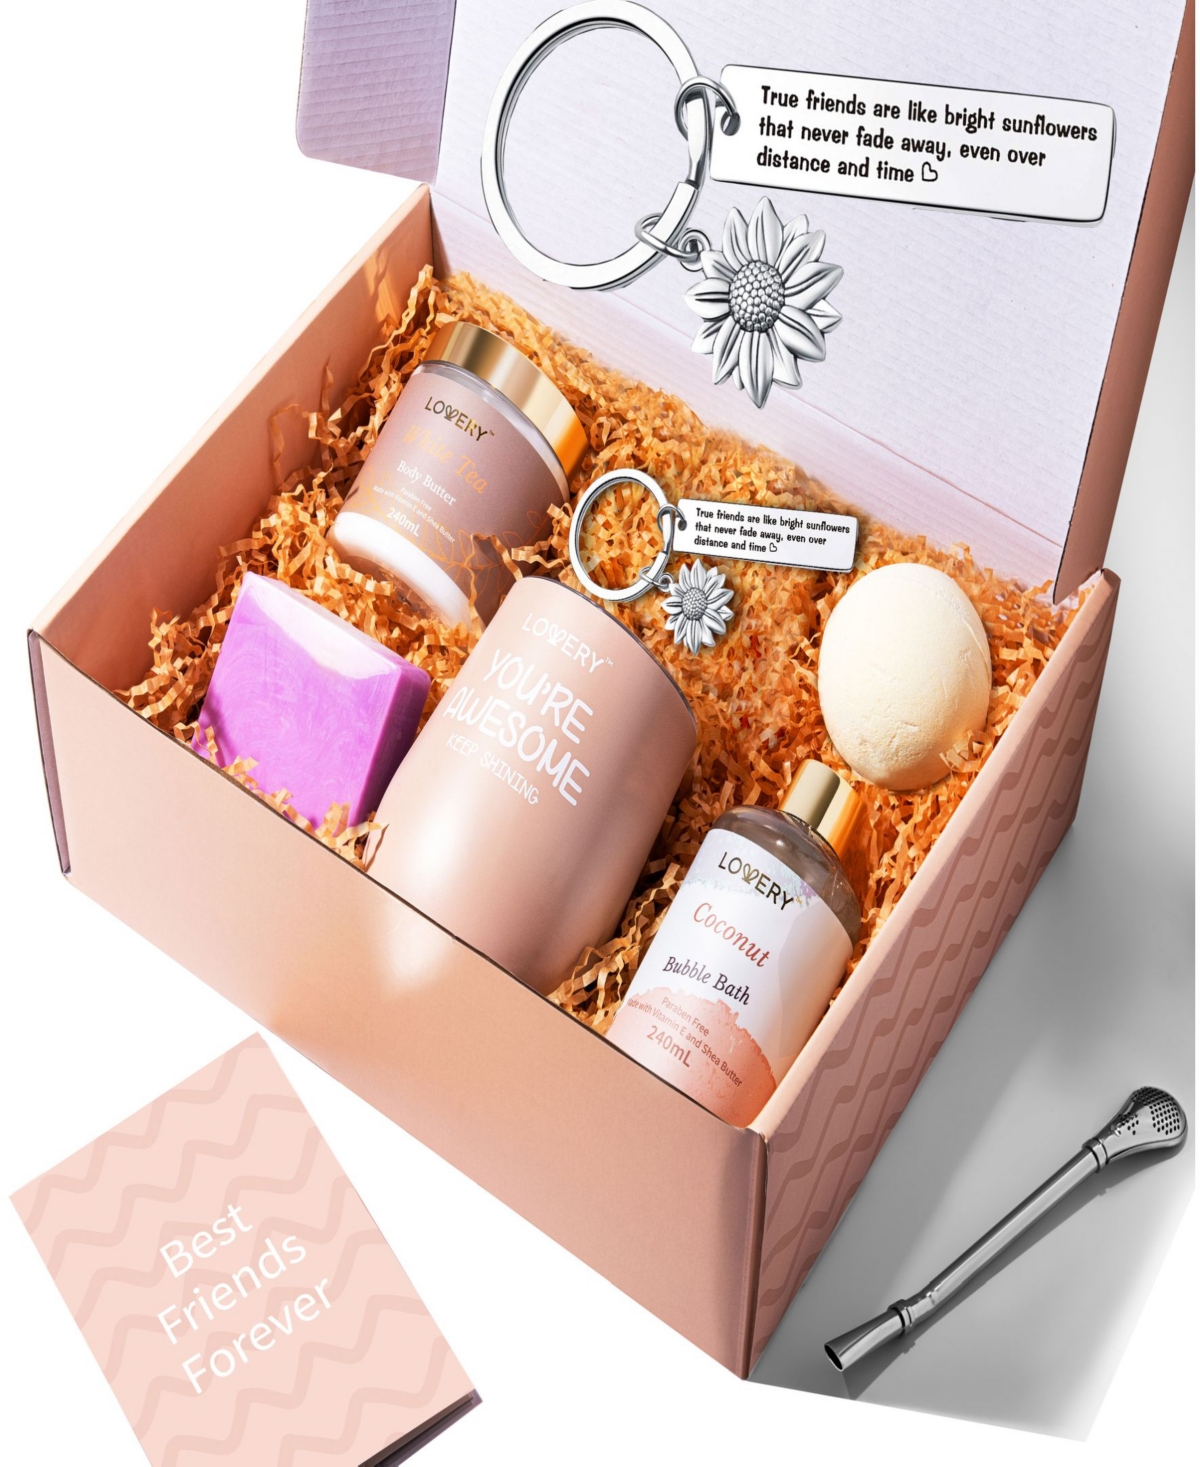 Best Friend Gifts Bath and Body Kit Handmade Beauty Personal Care Gift Set, 8 Piece